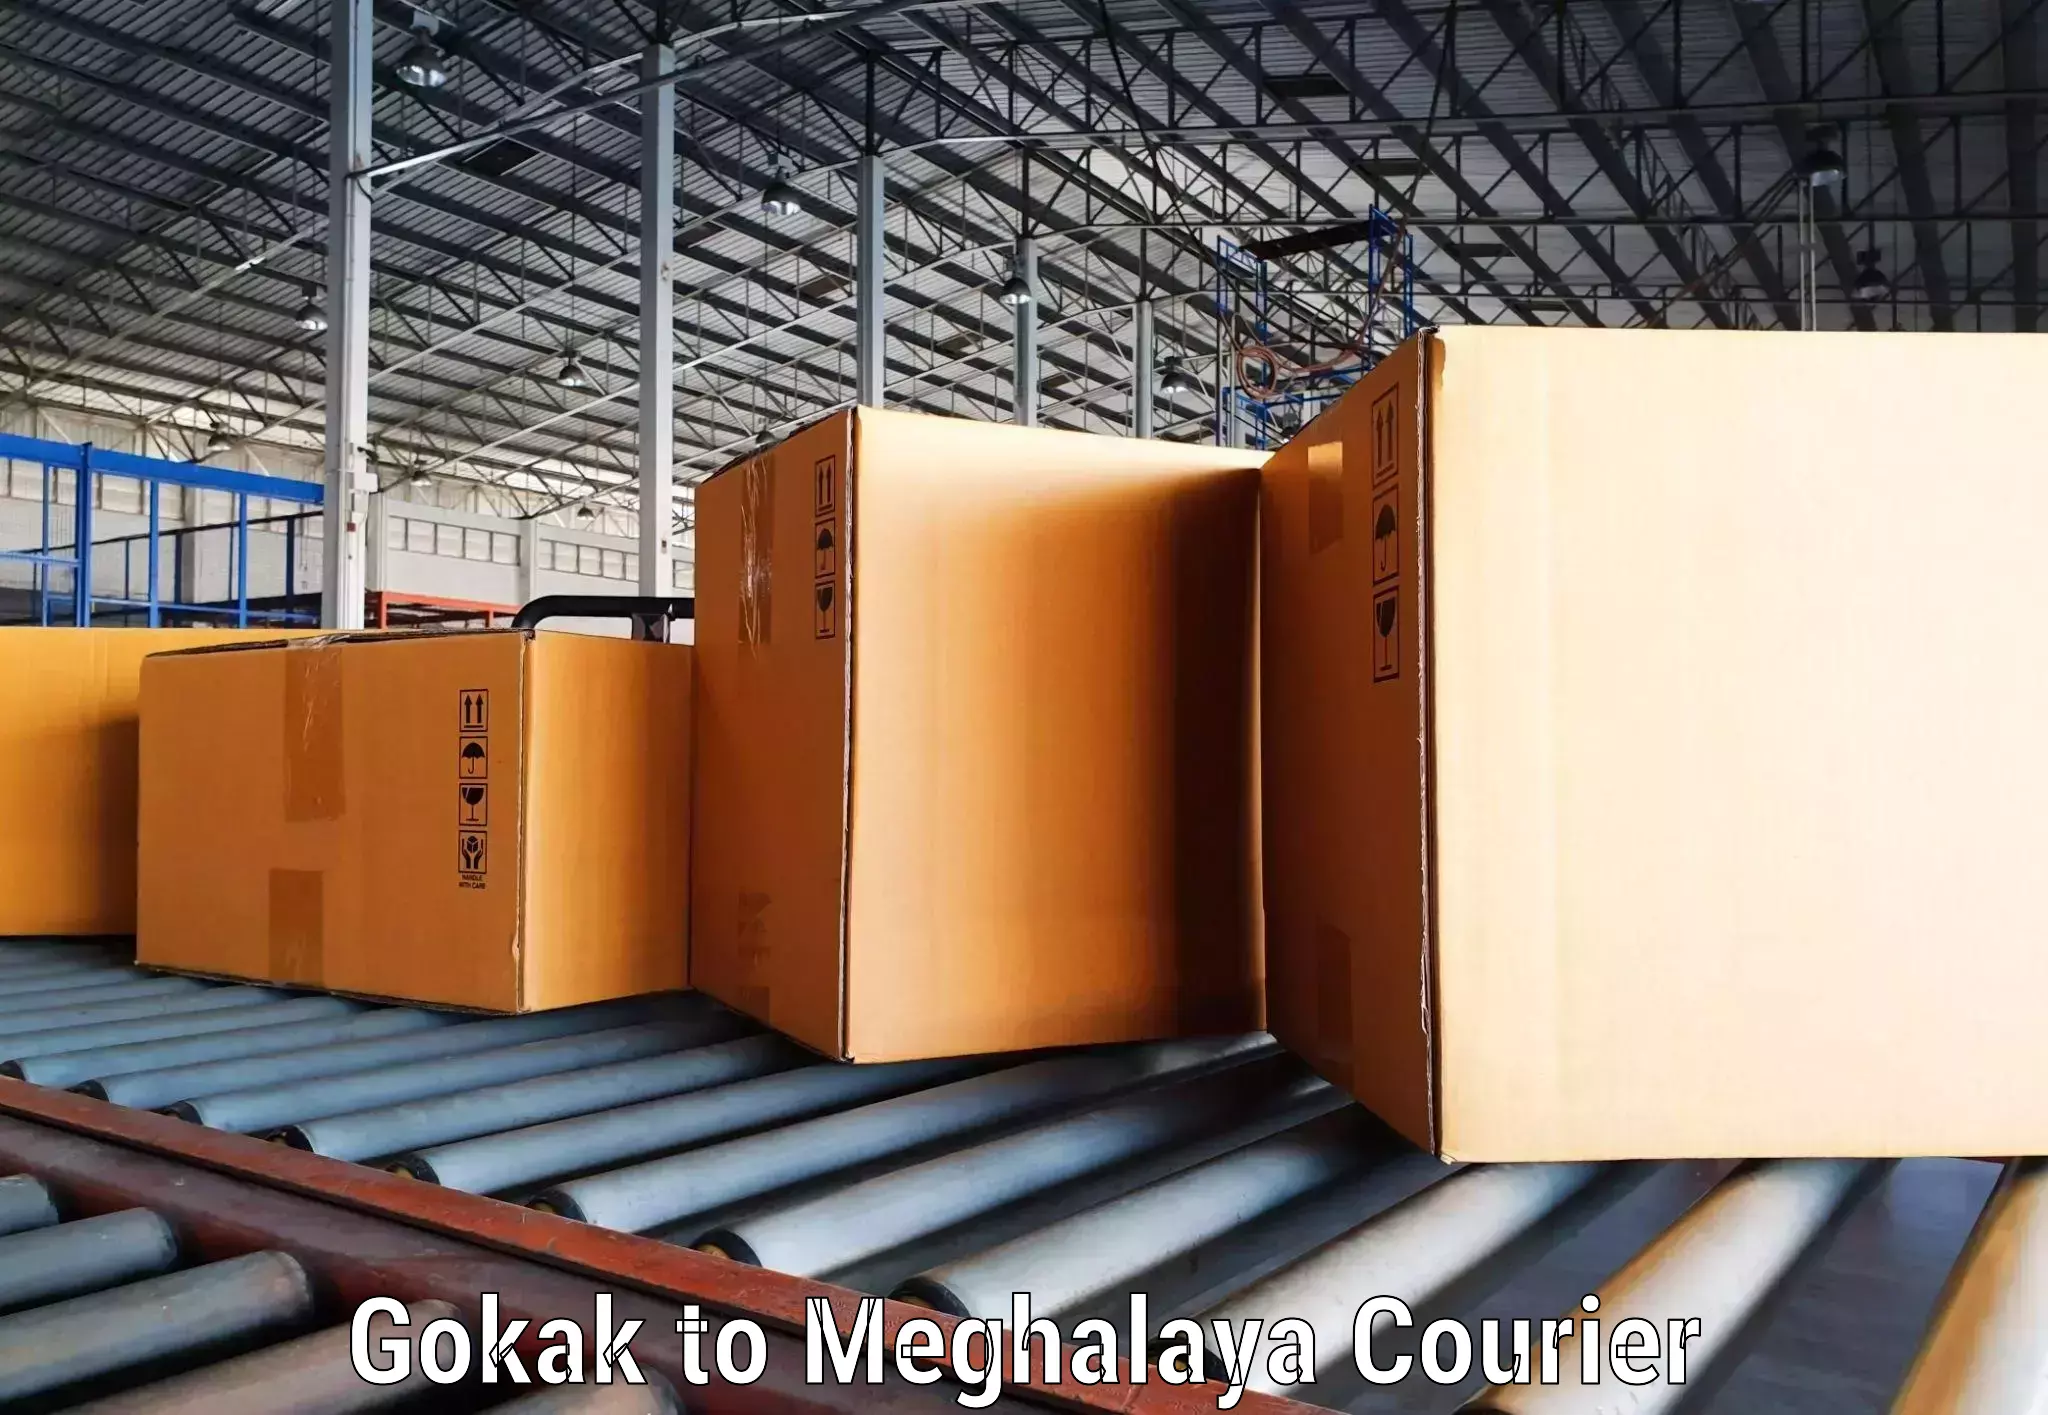 Round-the-clock parcel delivery in Gokak to Dkhiah West